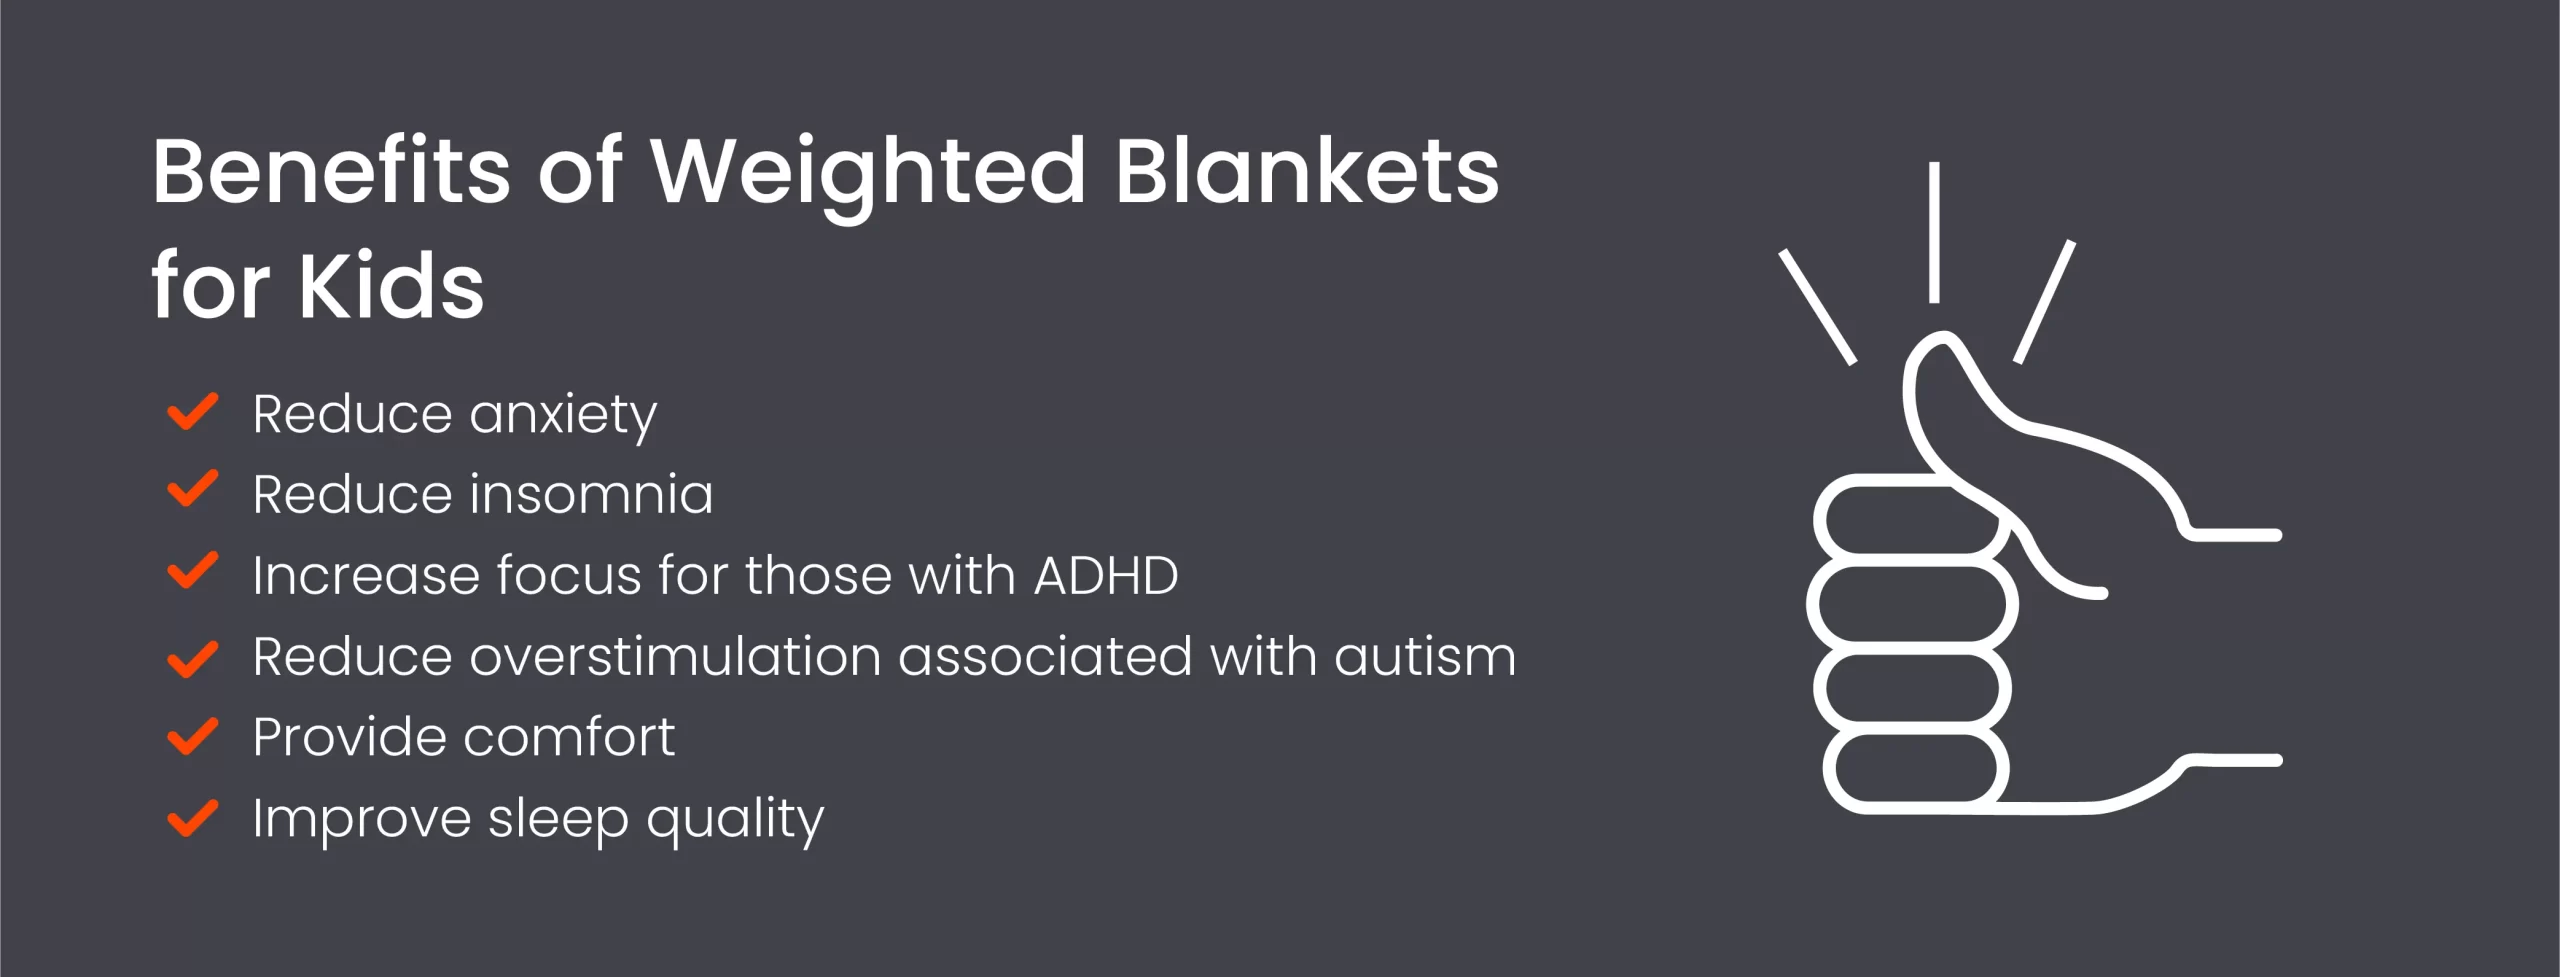 Benefits of Weighted Blankets for Kids